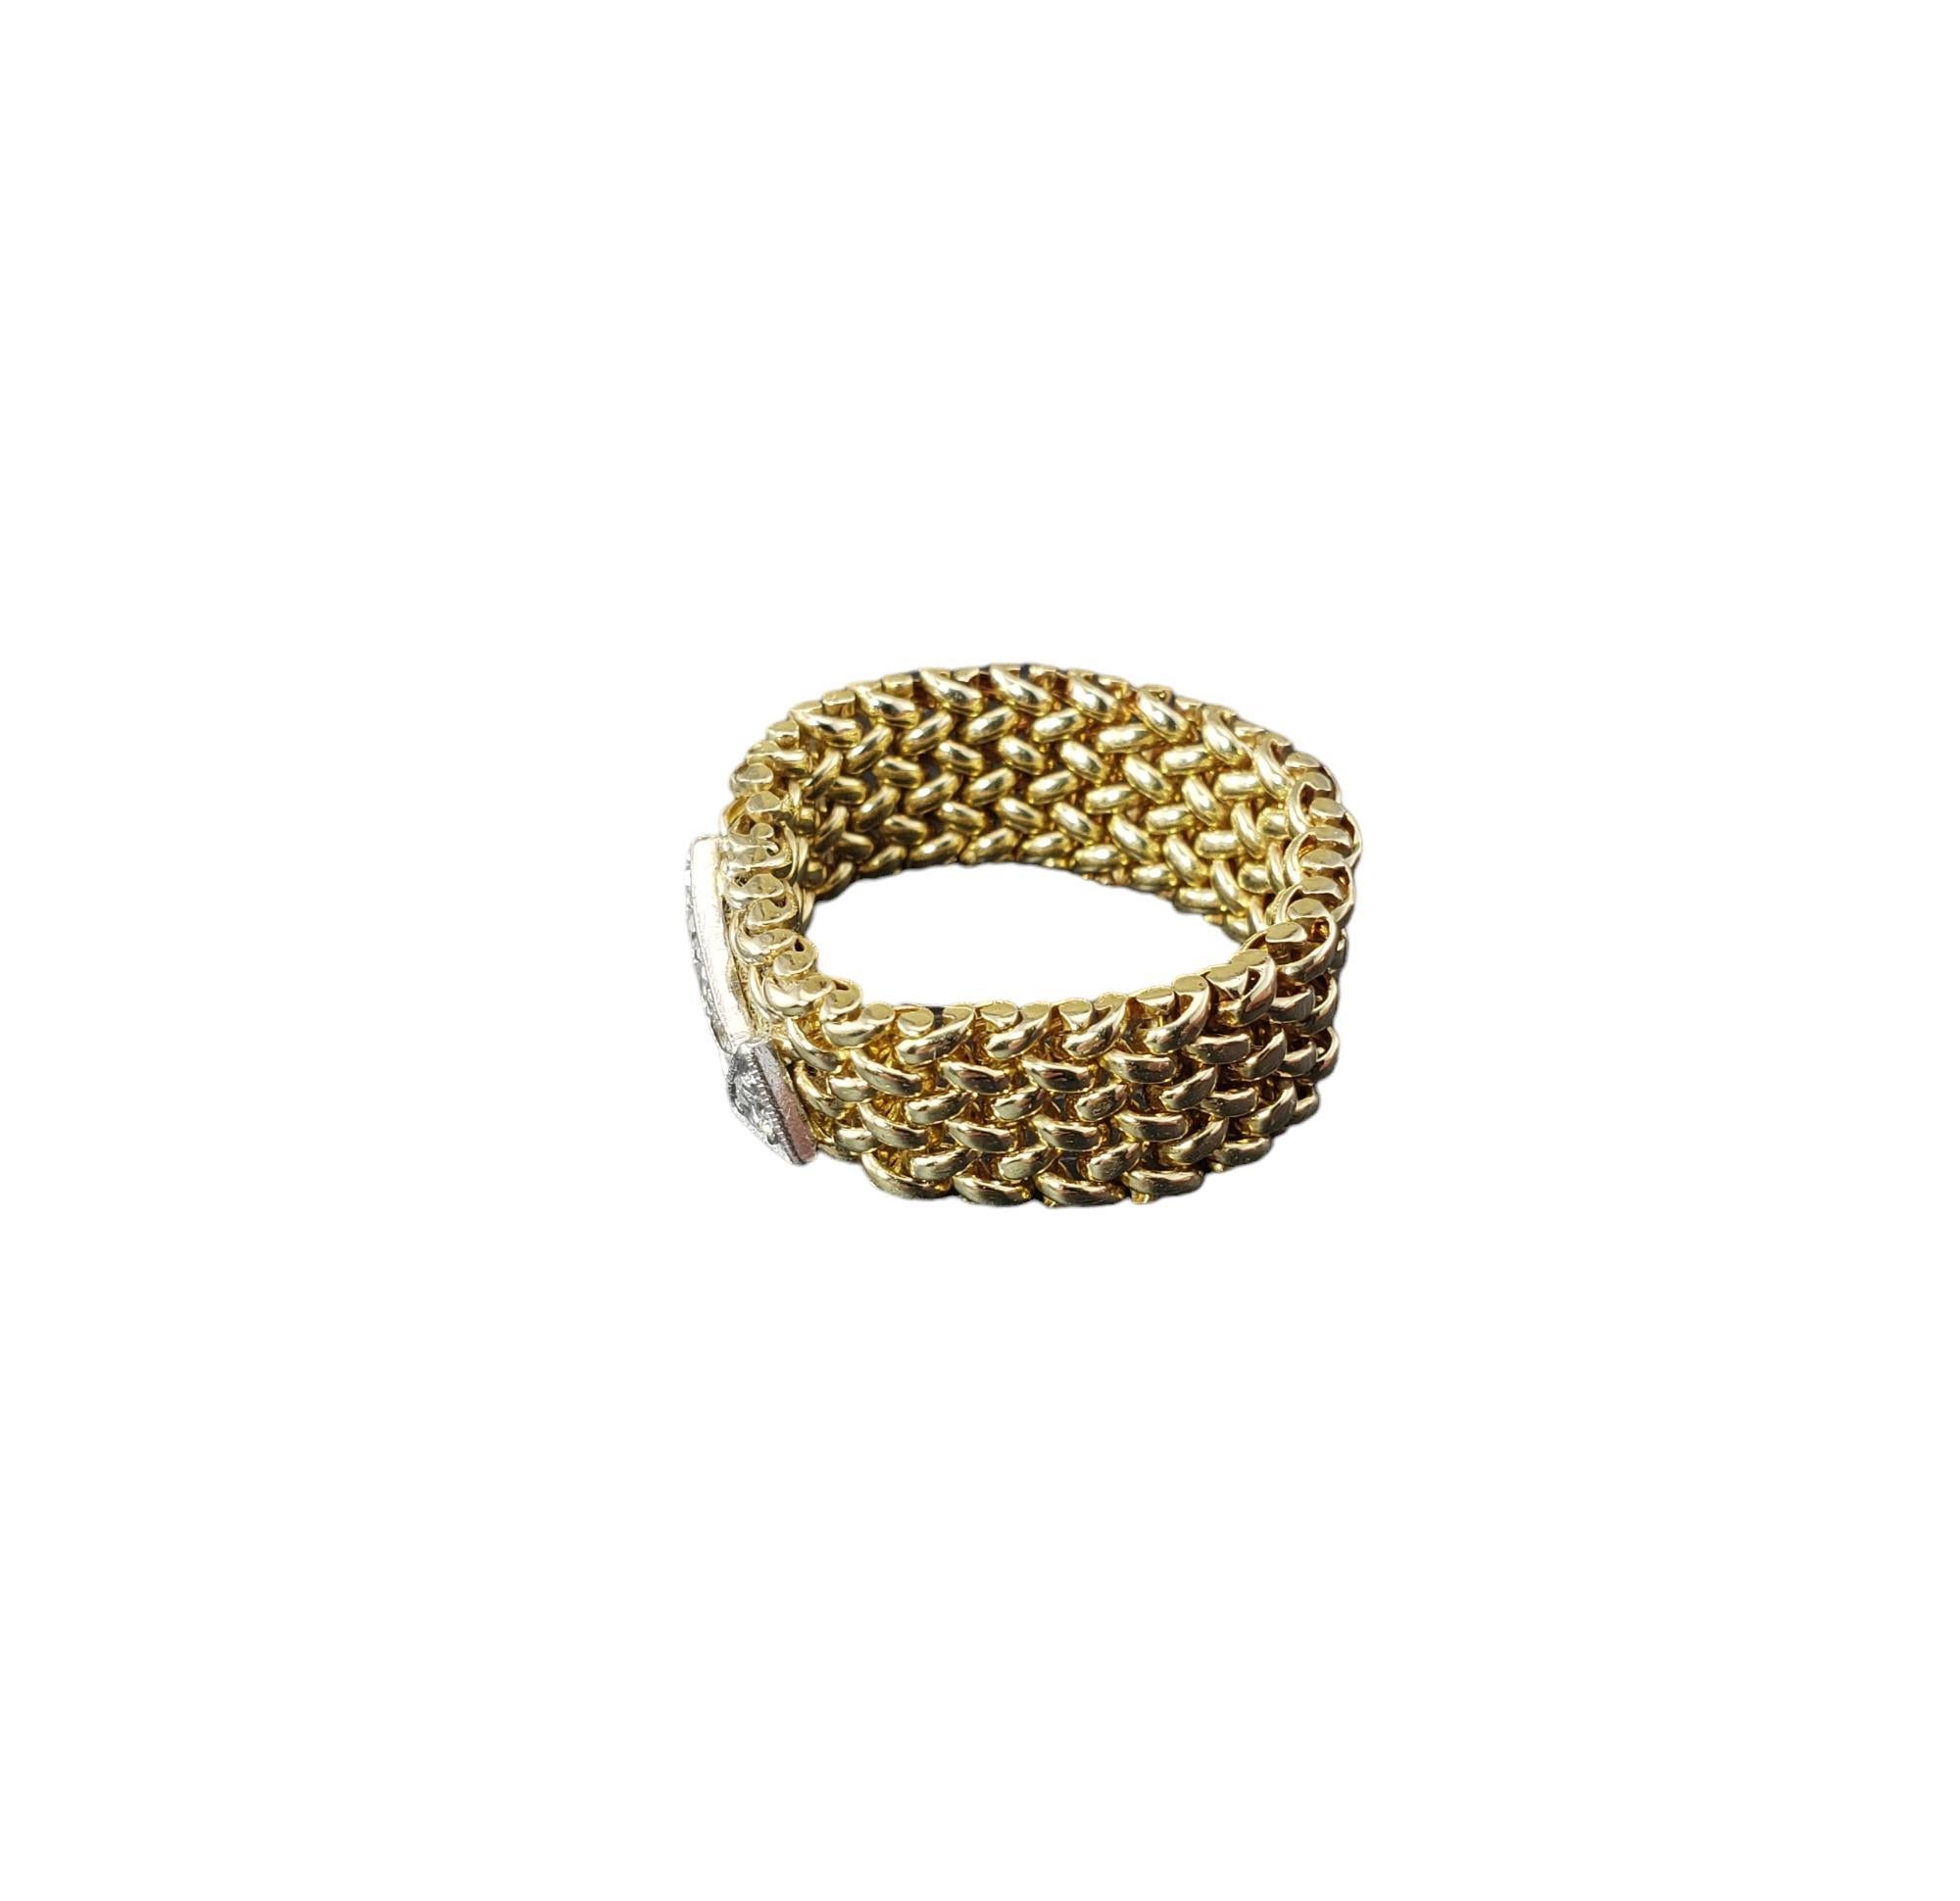 Brilliant Cut 14 Karat Yellow and White Gold Diamond Arrow Mesh Ring Size 8.25 #17091 For Sale